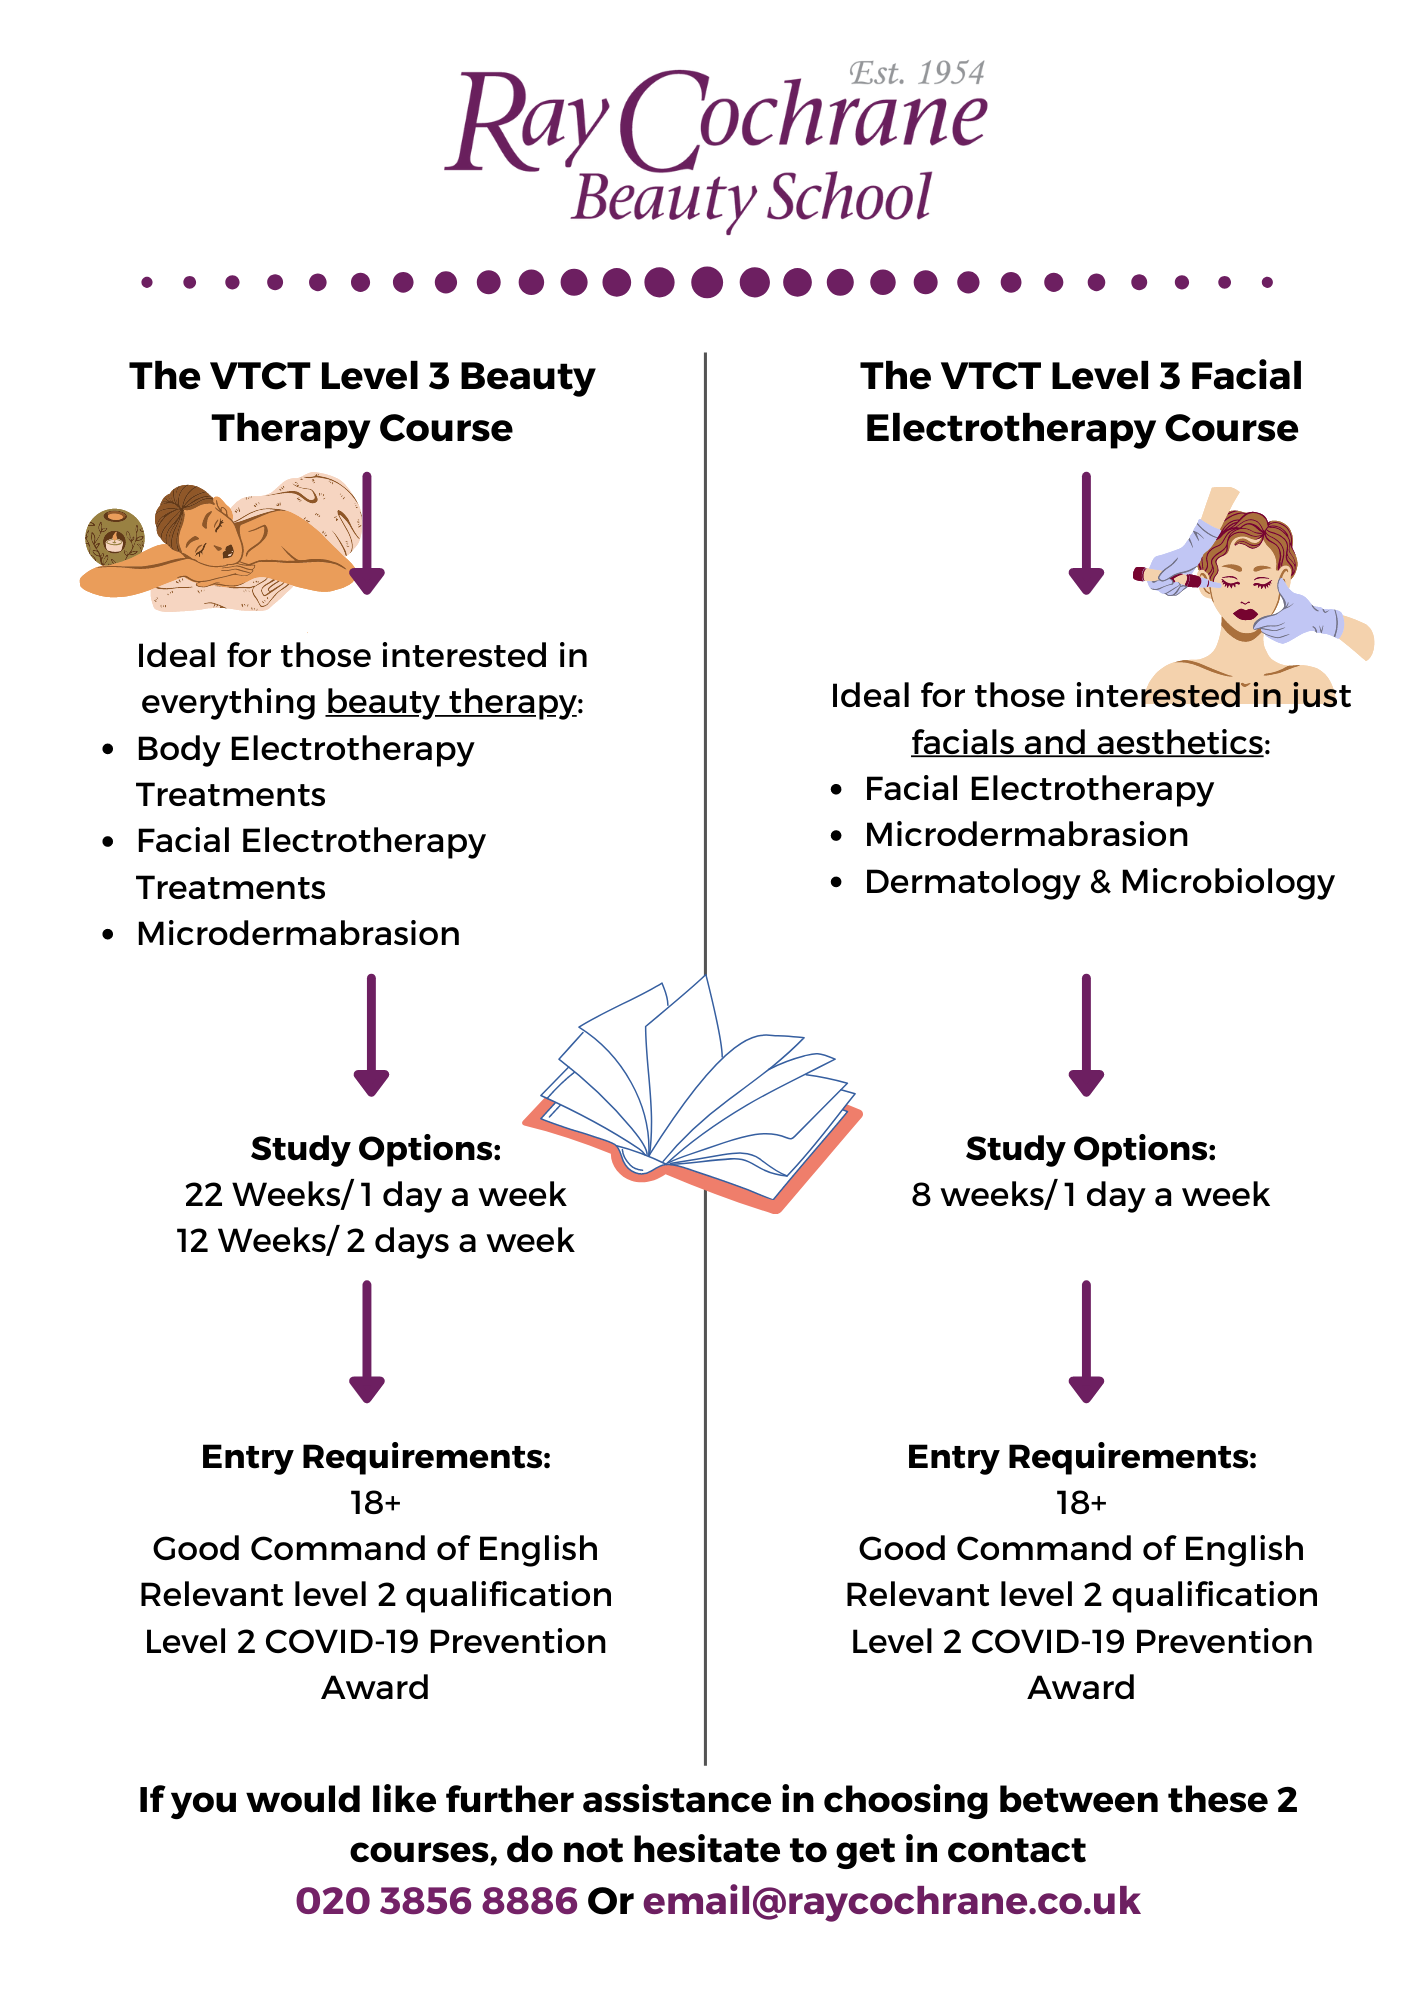 Infographic for difference between level 3 beauty therapy & facial electrotherapy